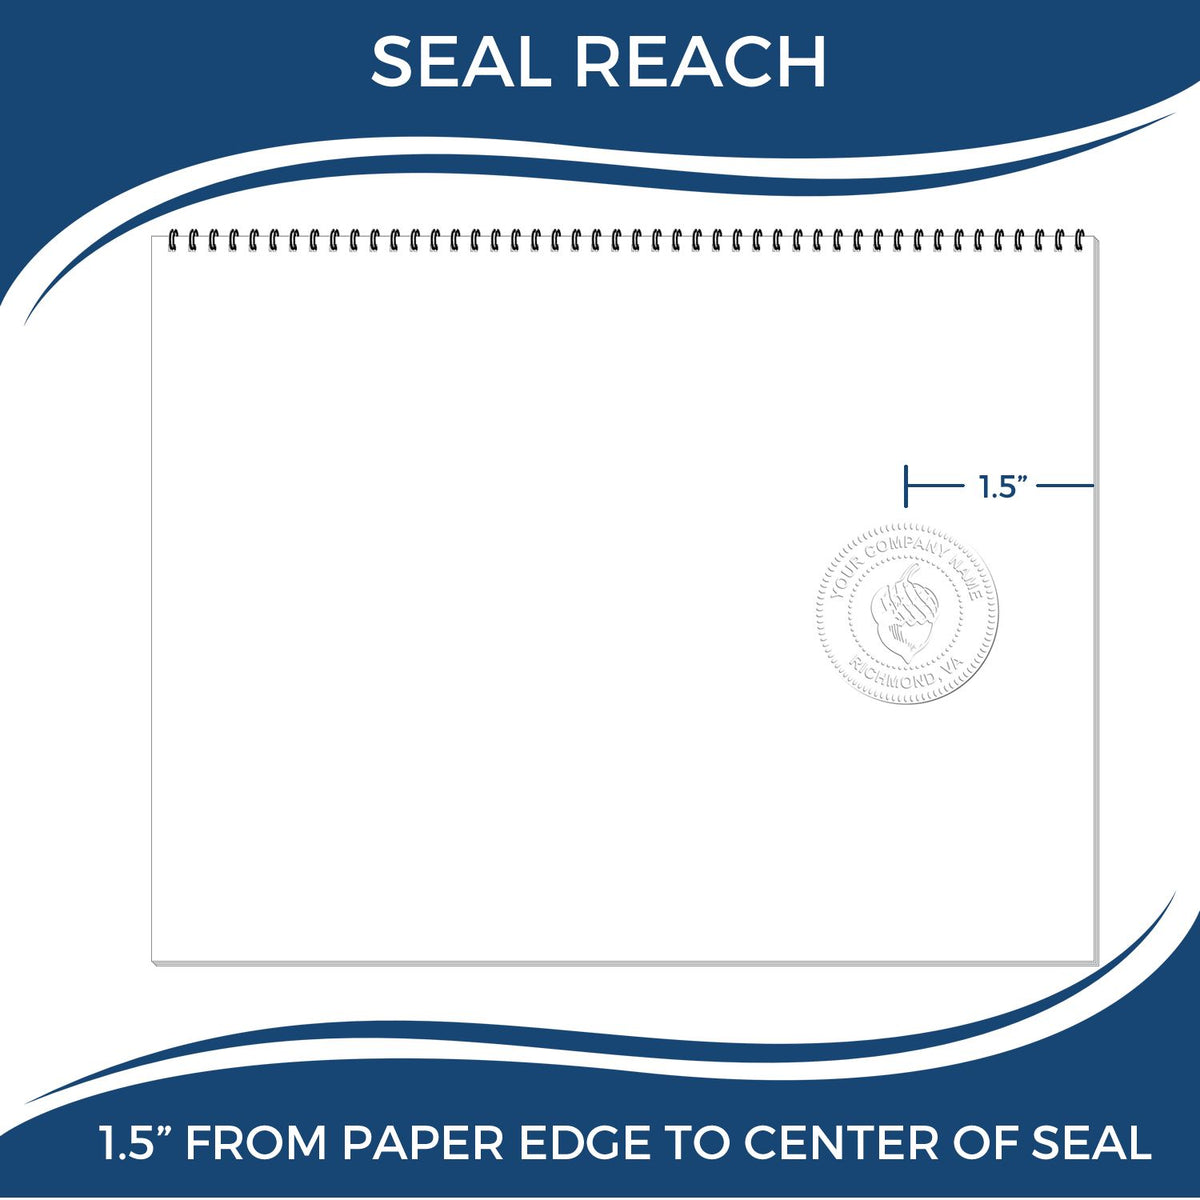 An infographic showing the seal reach which is represented by a ruler and a miniature seal image of the Gift South Dakota Architect Seal